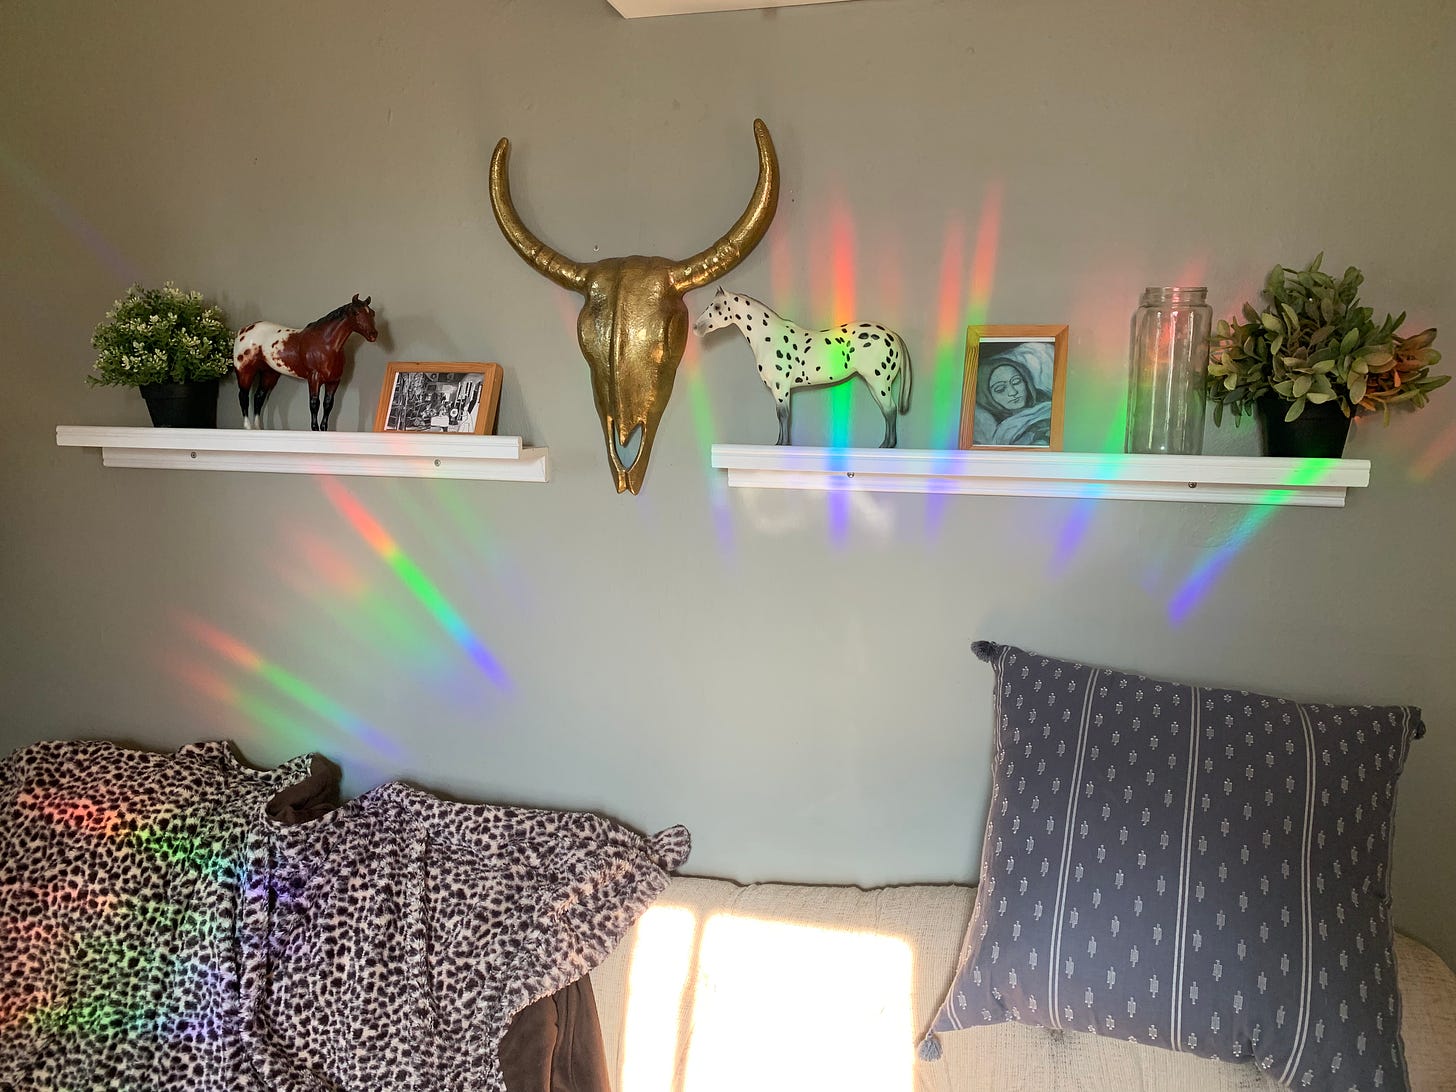 Above a couch and living room adornments on a shelf bursts a crescent of rainbow light.